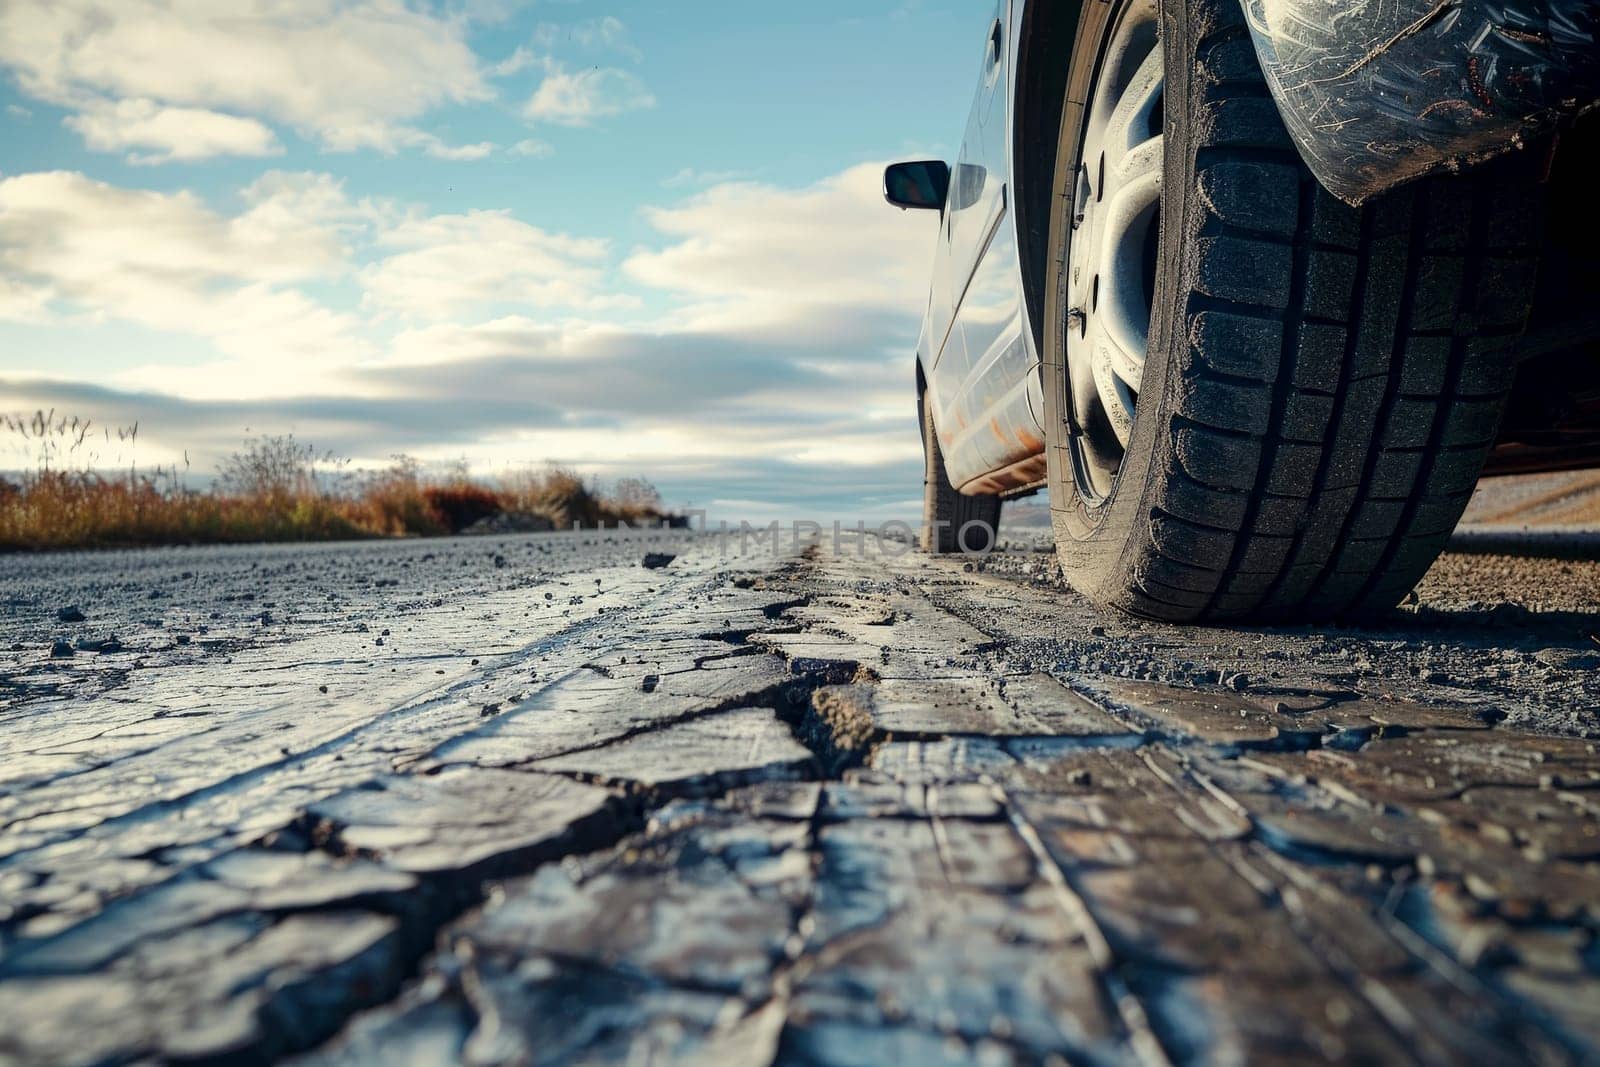 A car tire is shown on a road with a cracked surface by matamnad